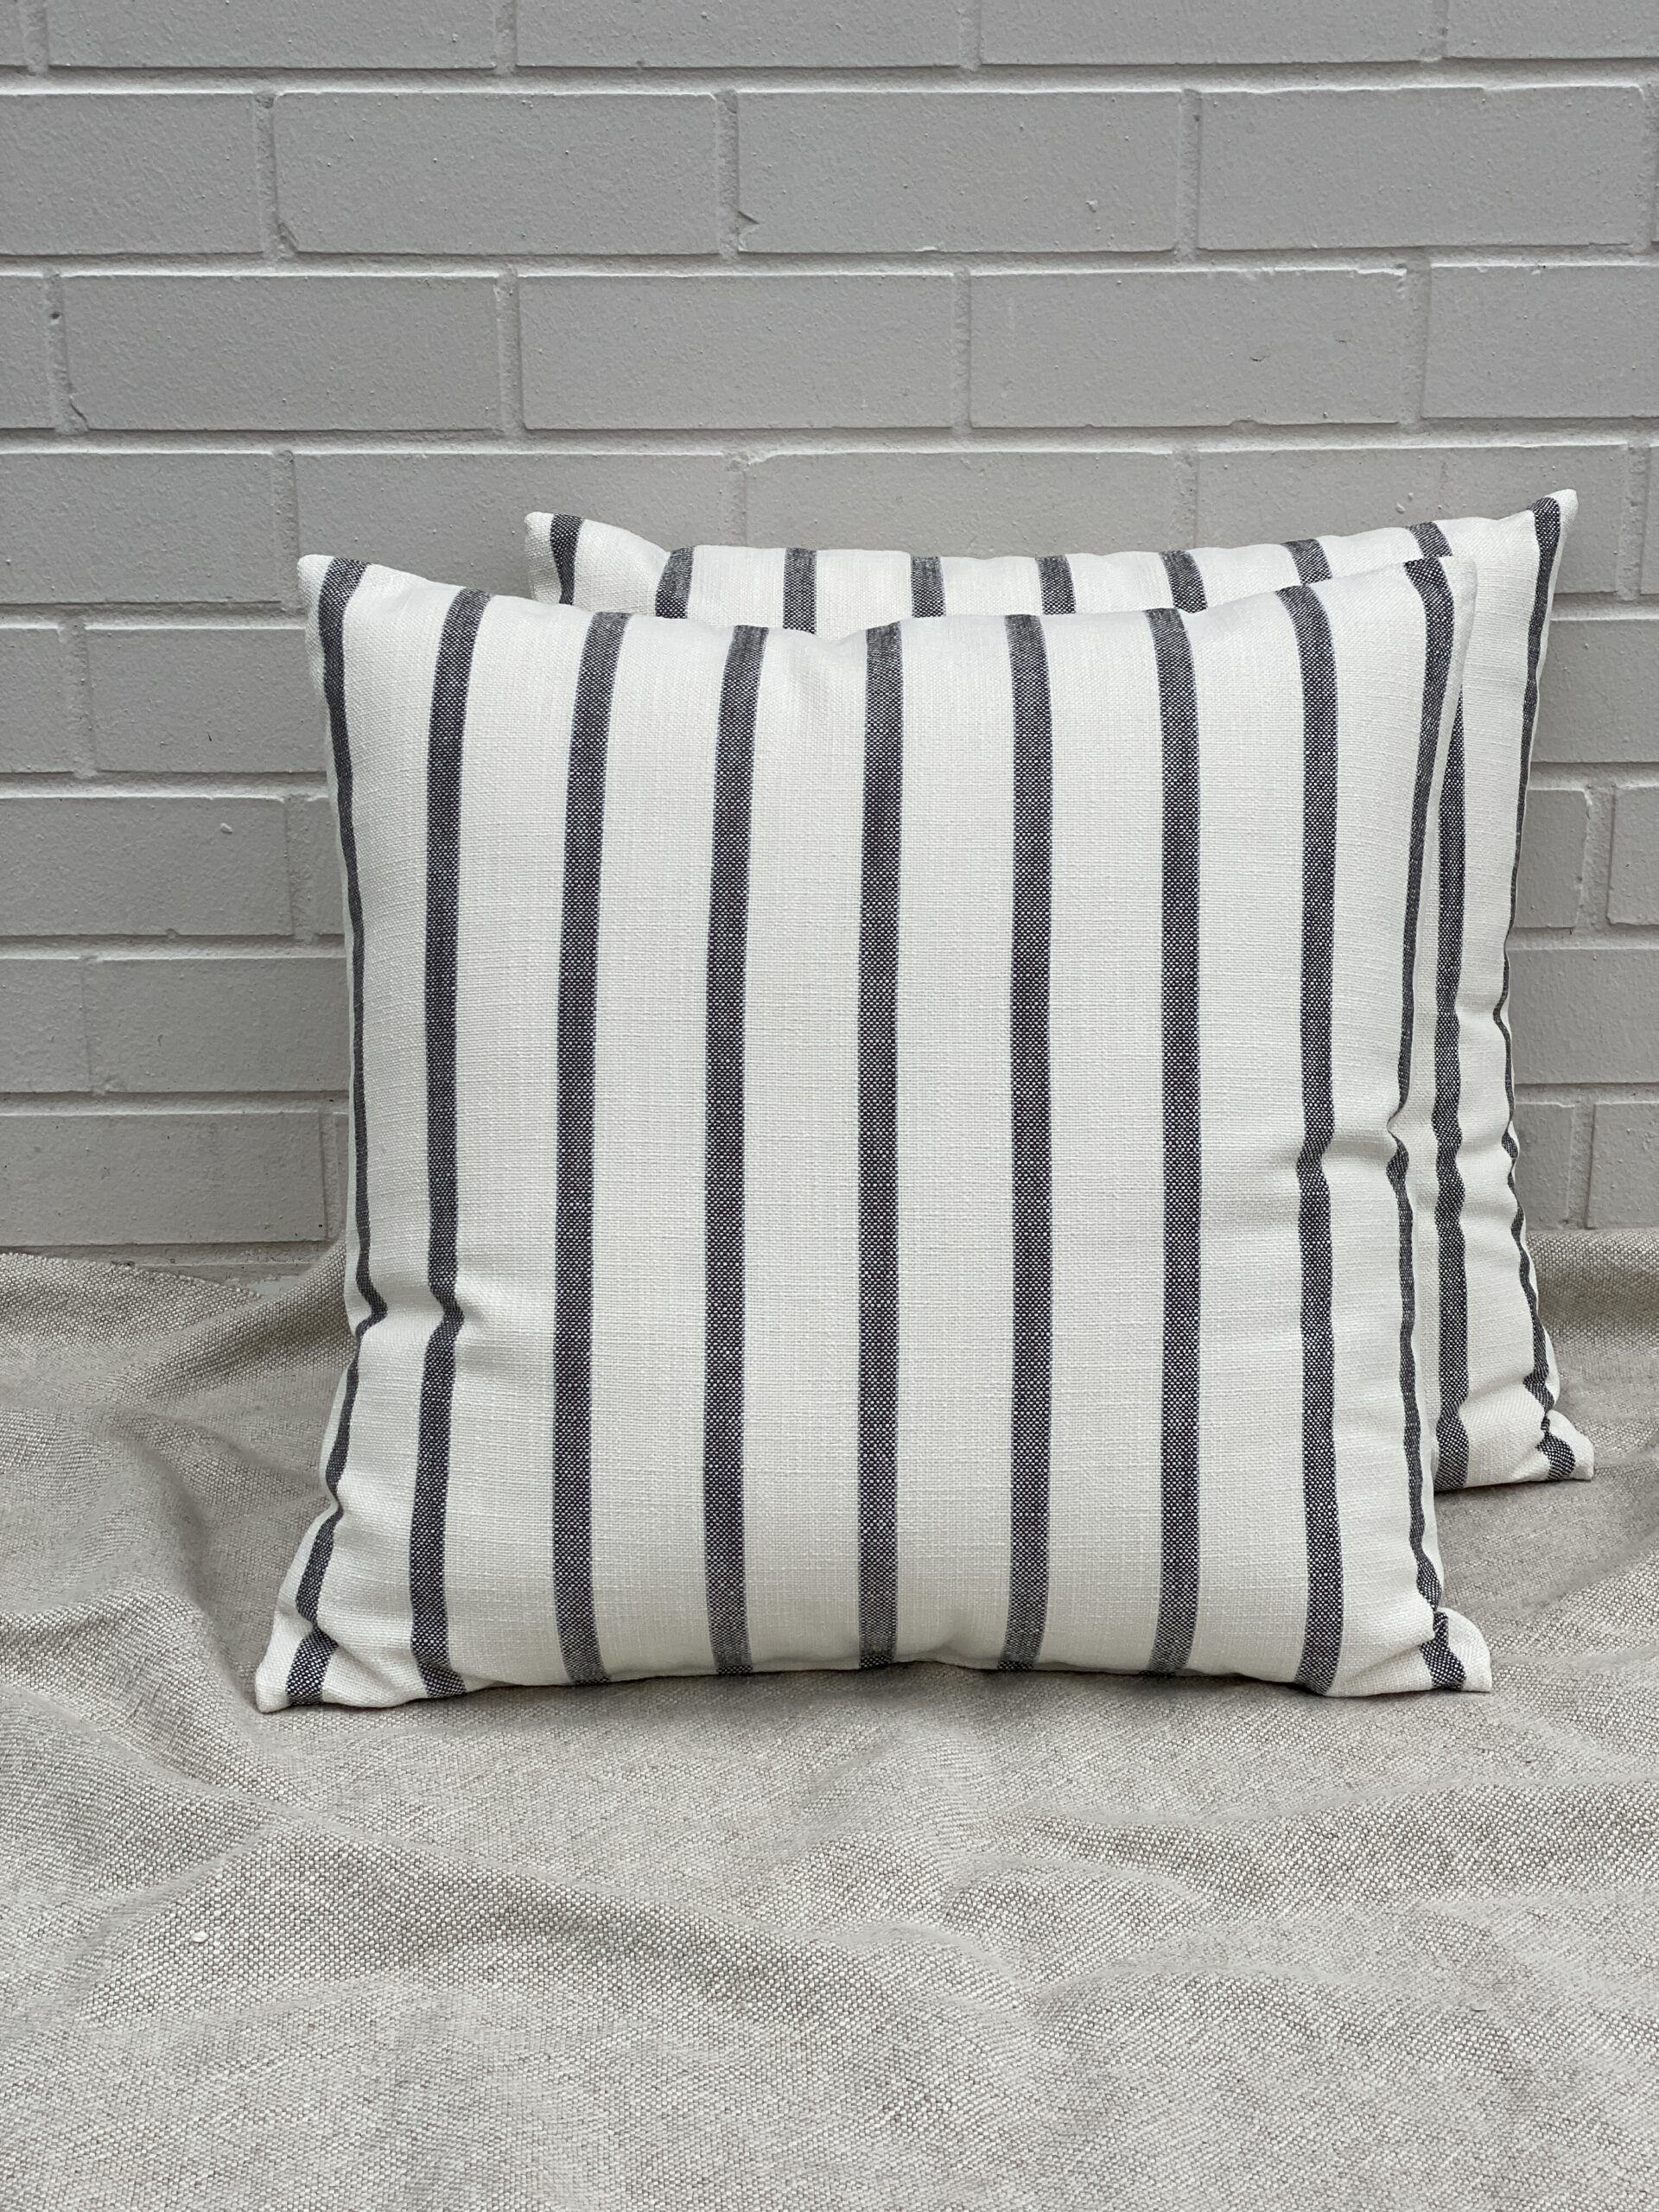 Rebecca Atwood Outdoor Pillows